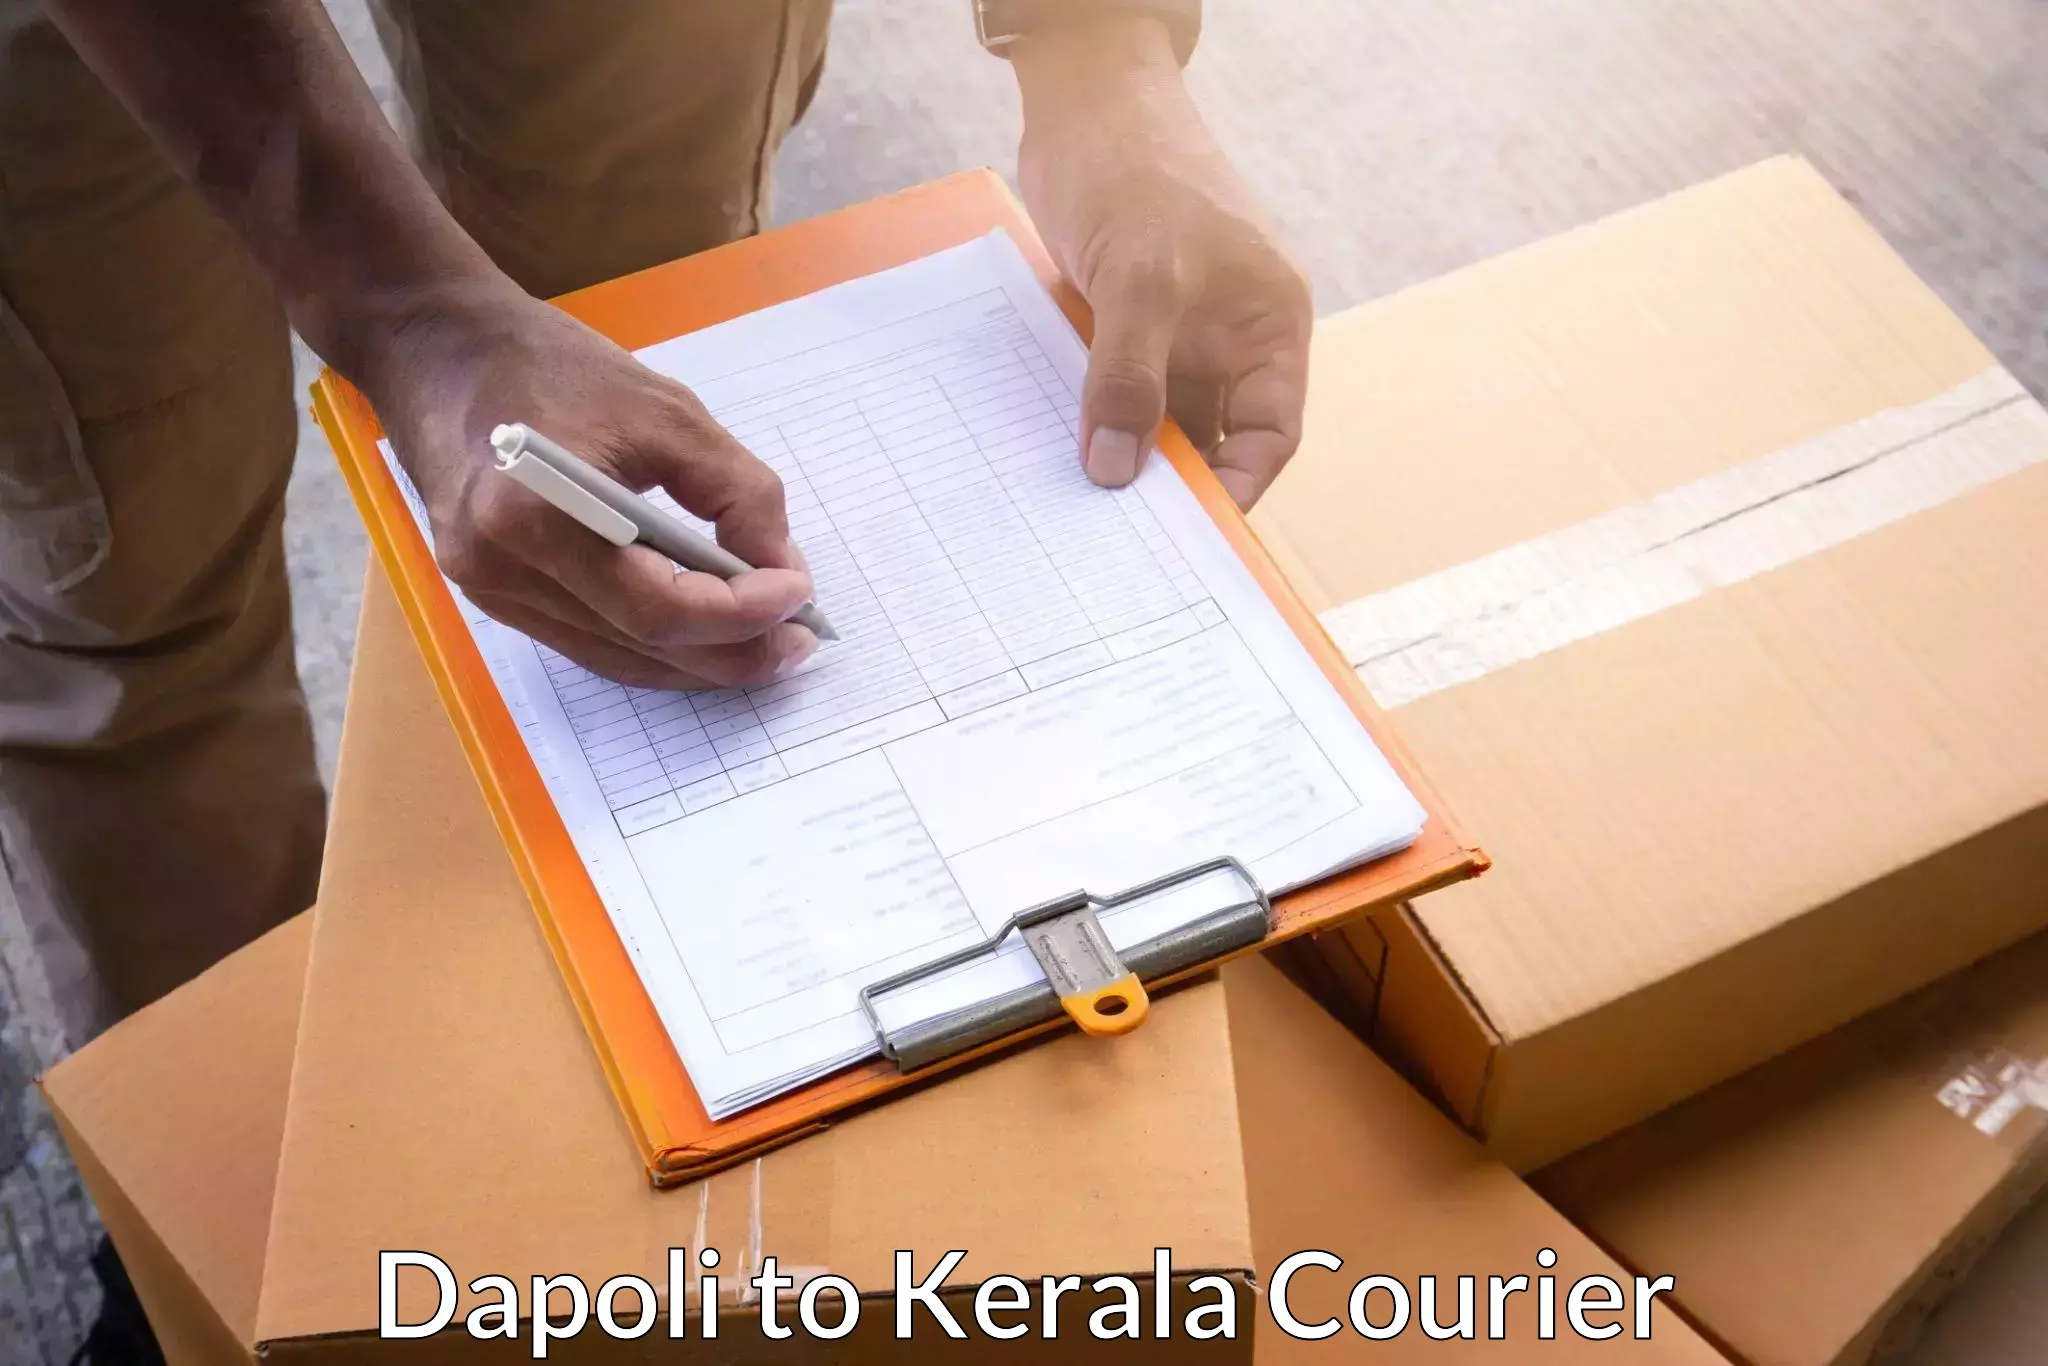 Courier service partnerships Dapoli to Thalassery